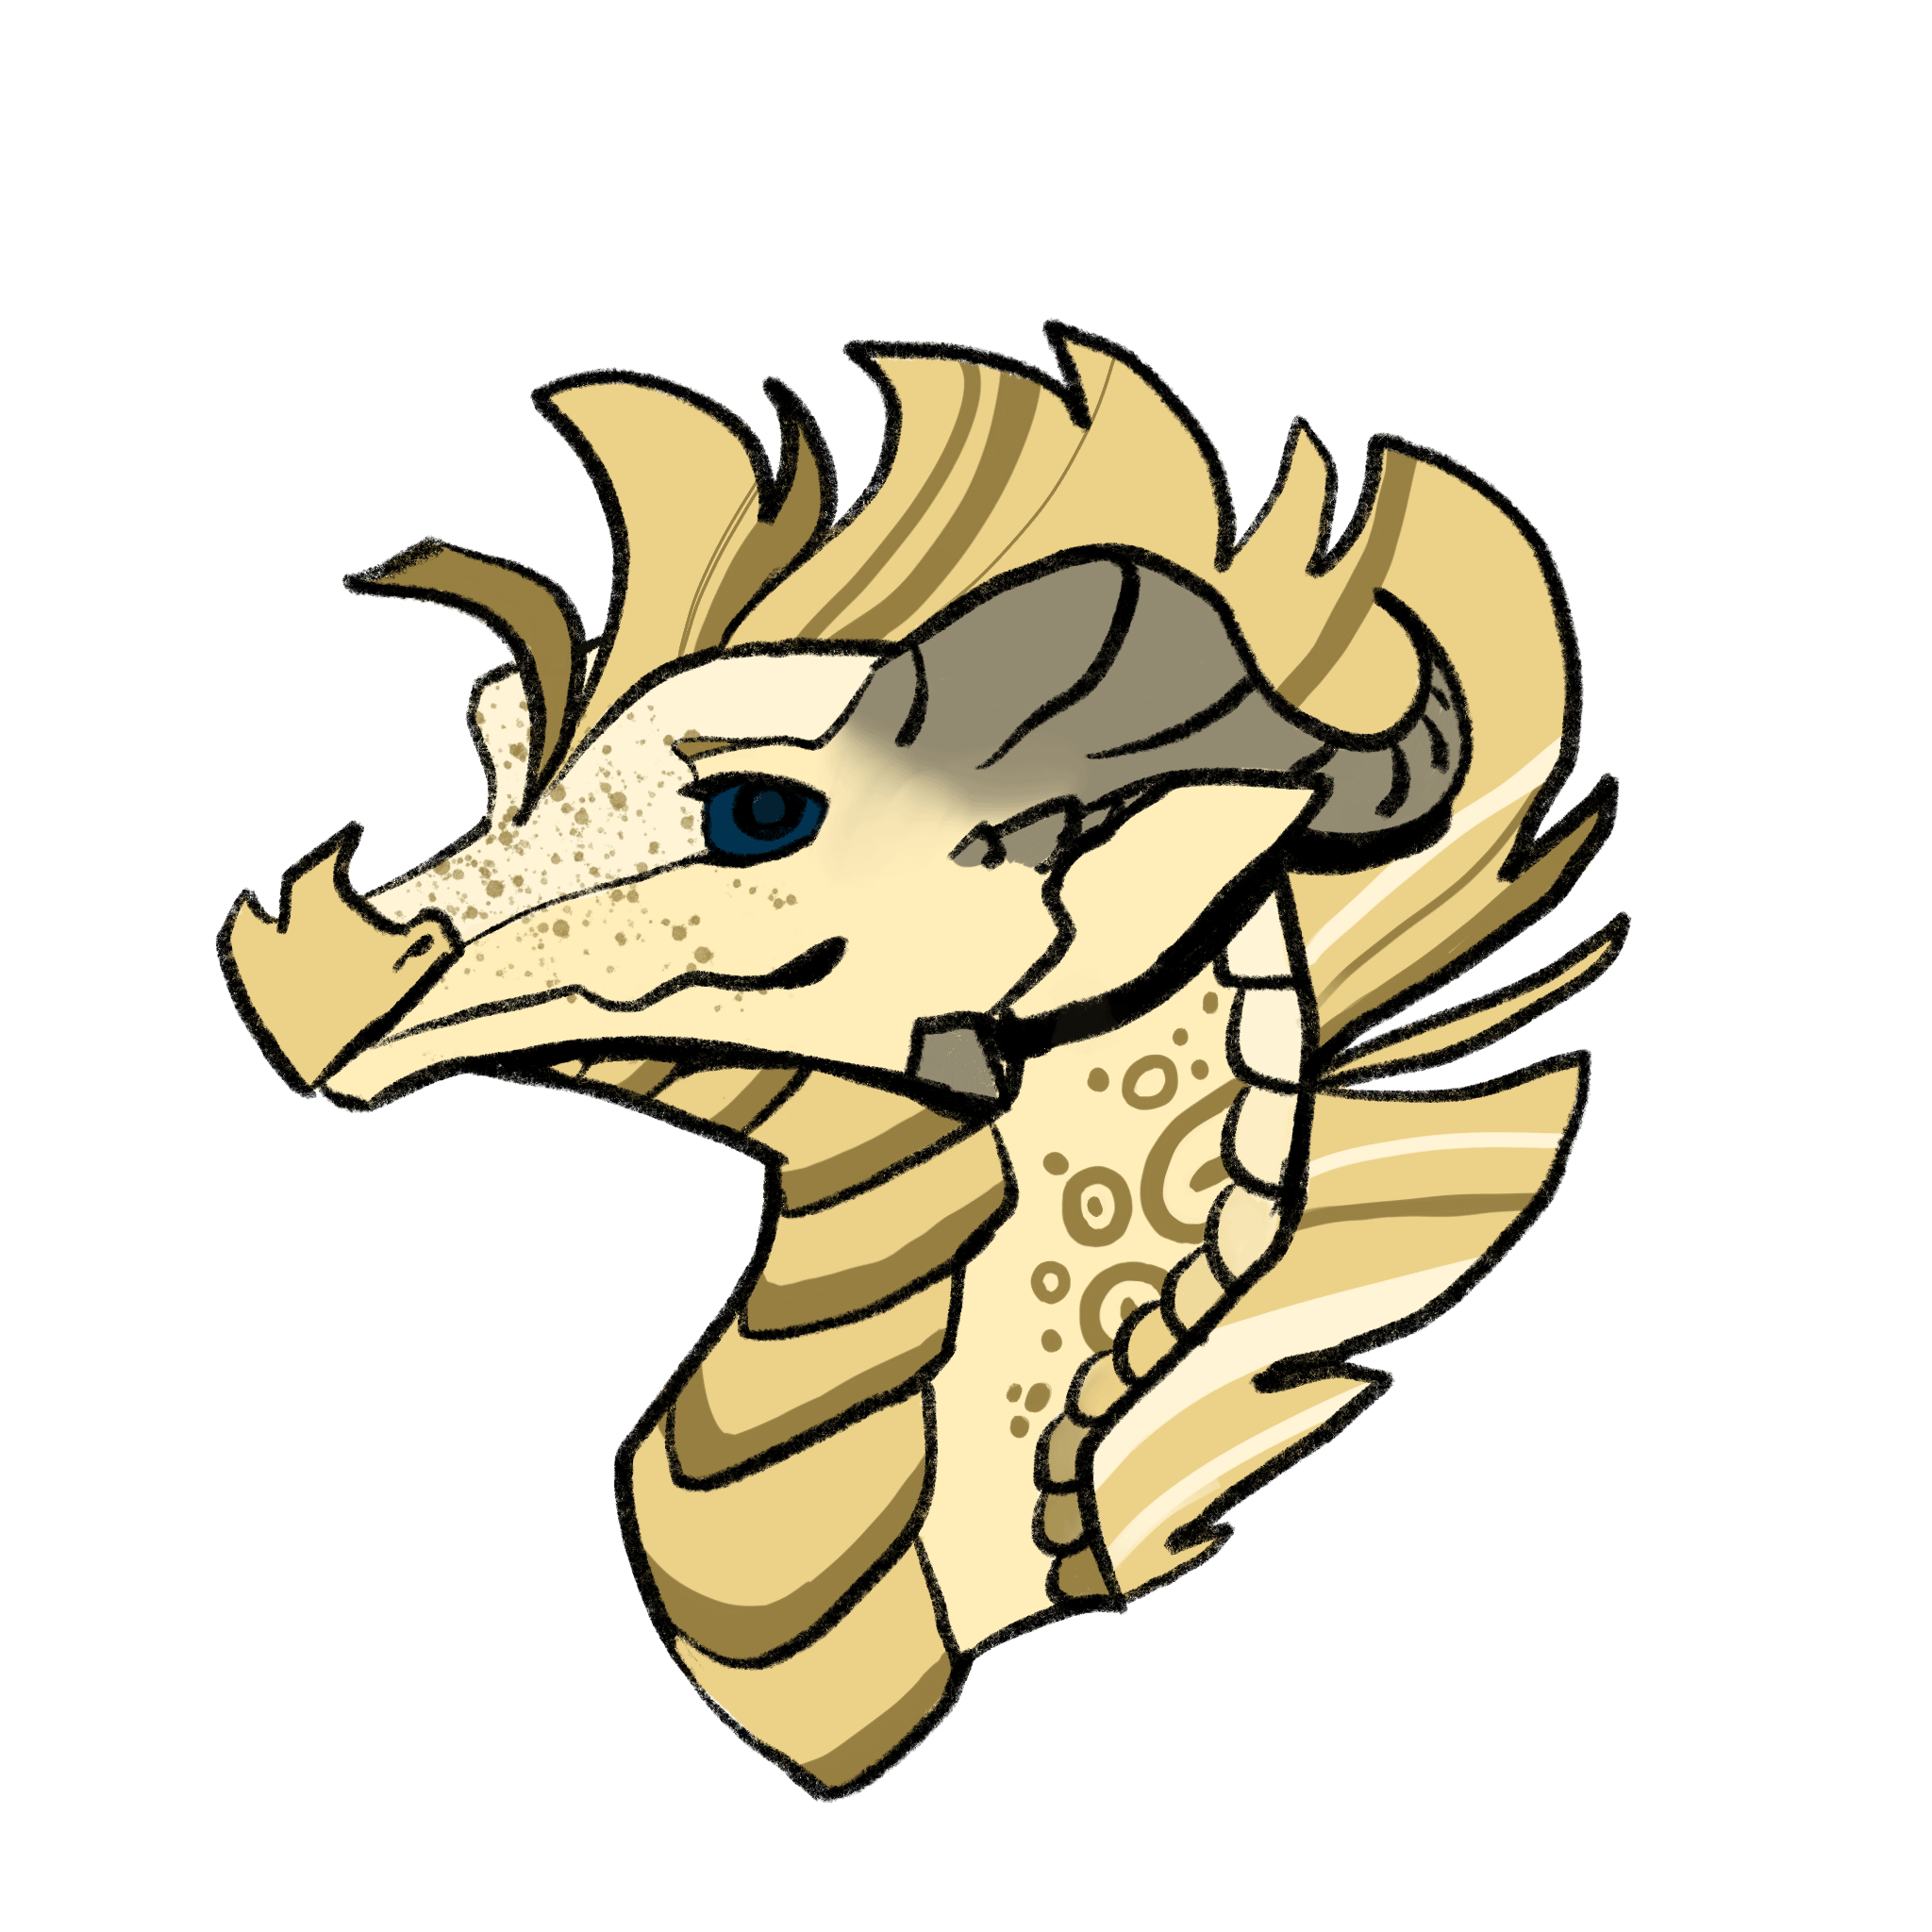 Art production is going slow because i strained my finger by drawing to much so here have this sandwing headshot ill have to wait for my finger to stop hurting for another big thingy rwingsoffire